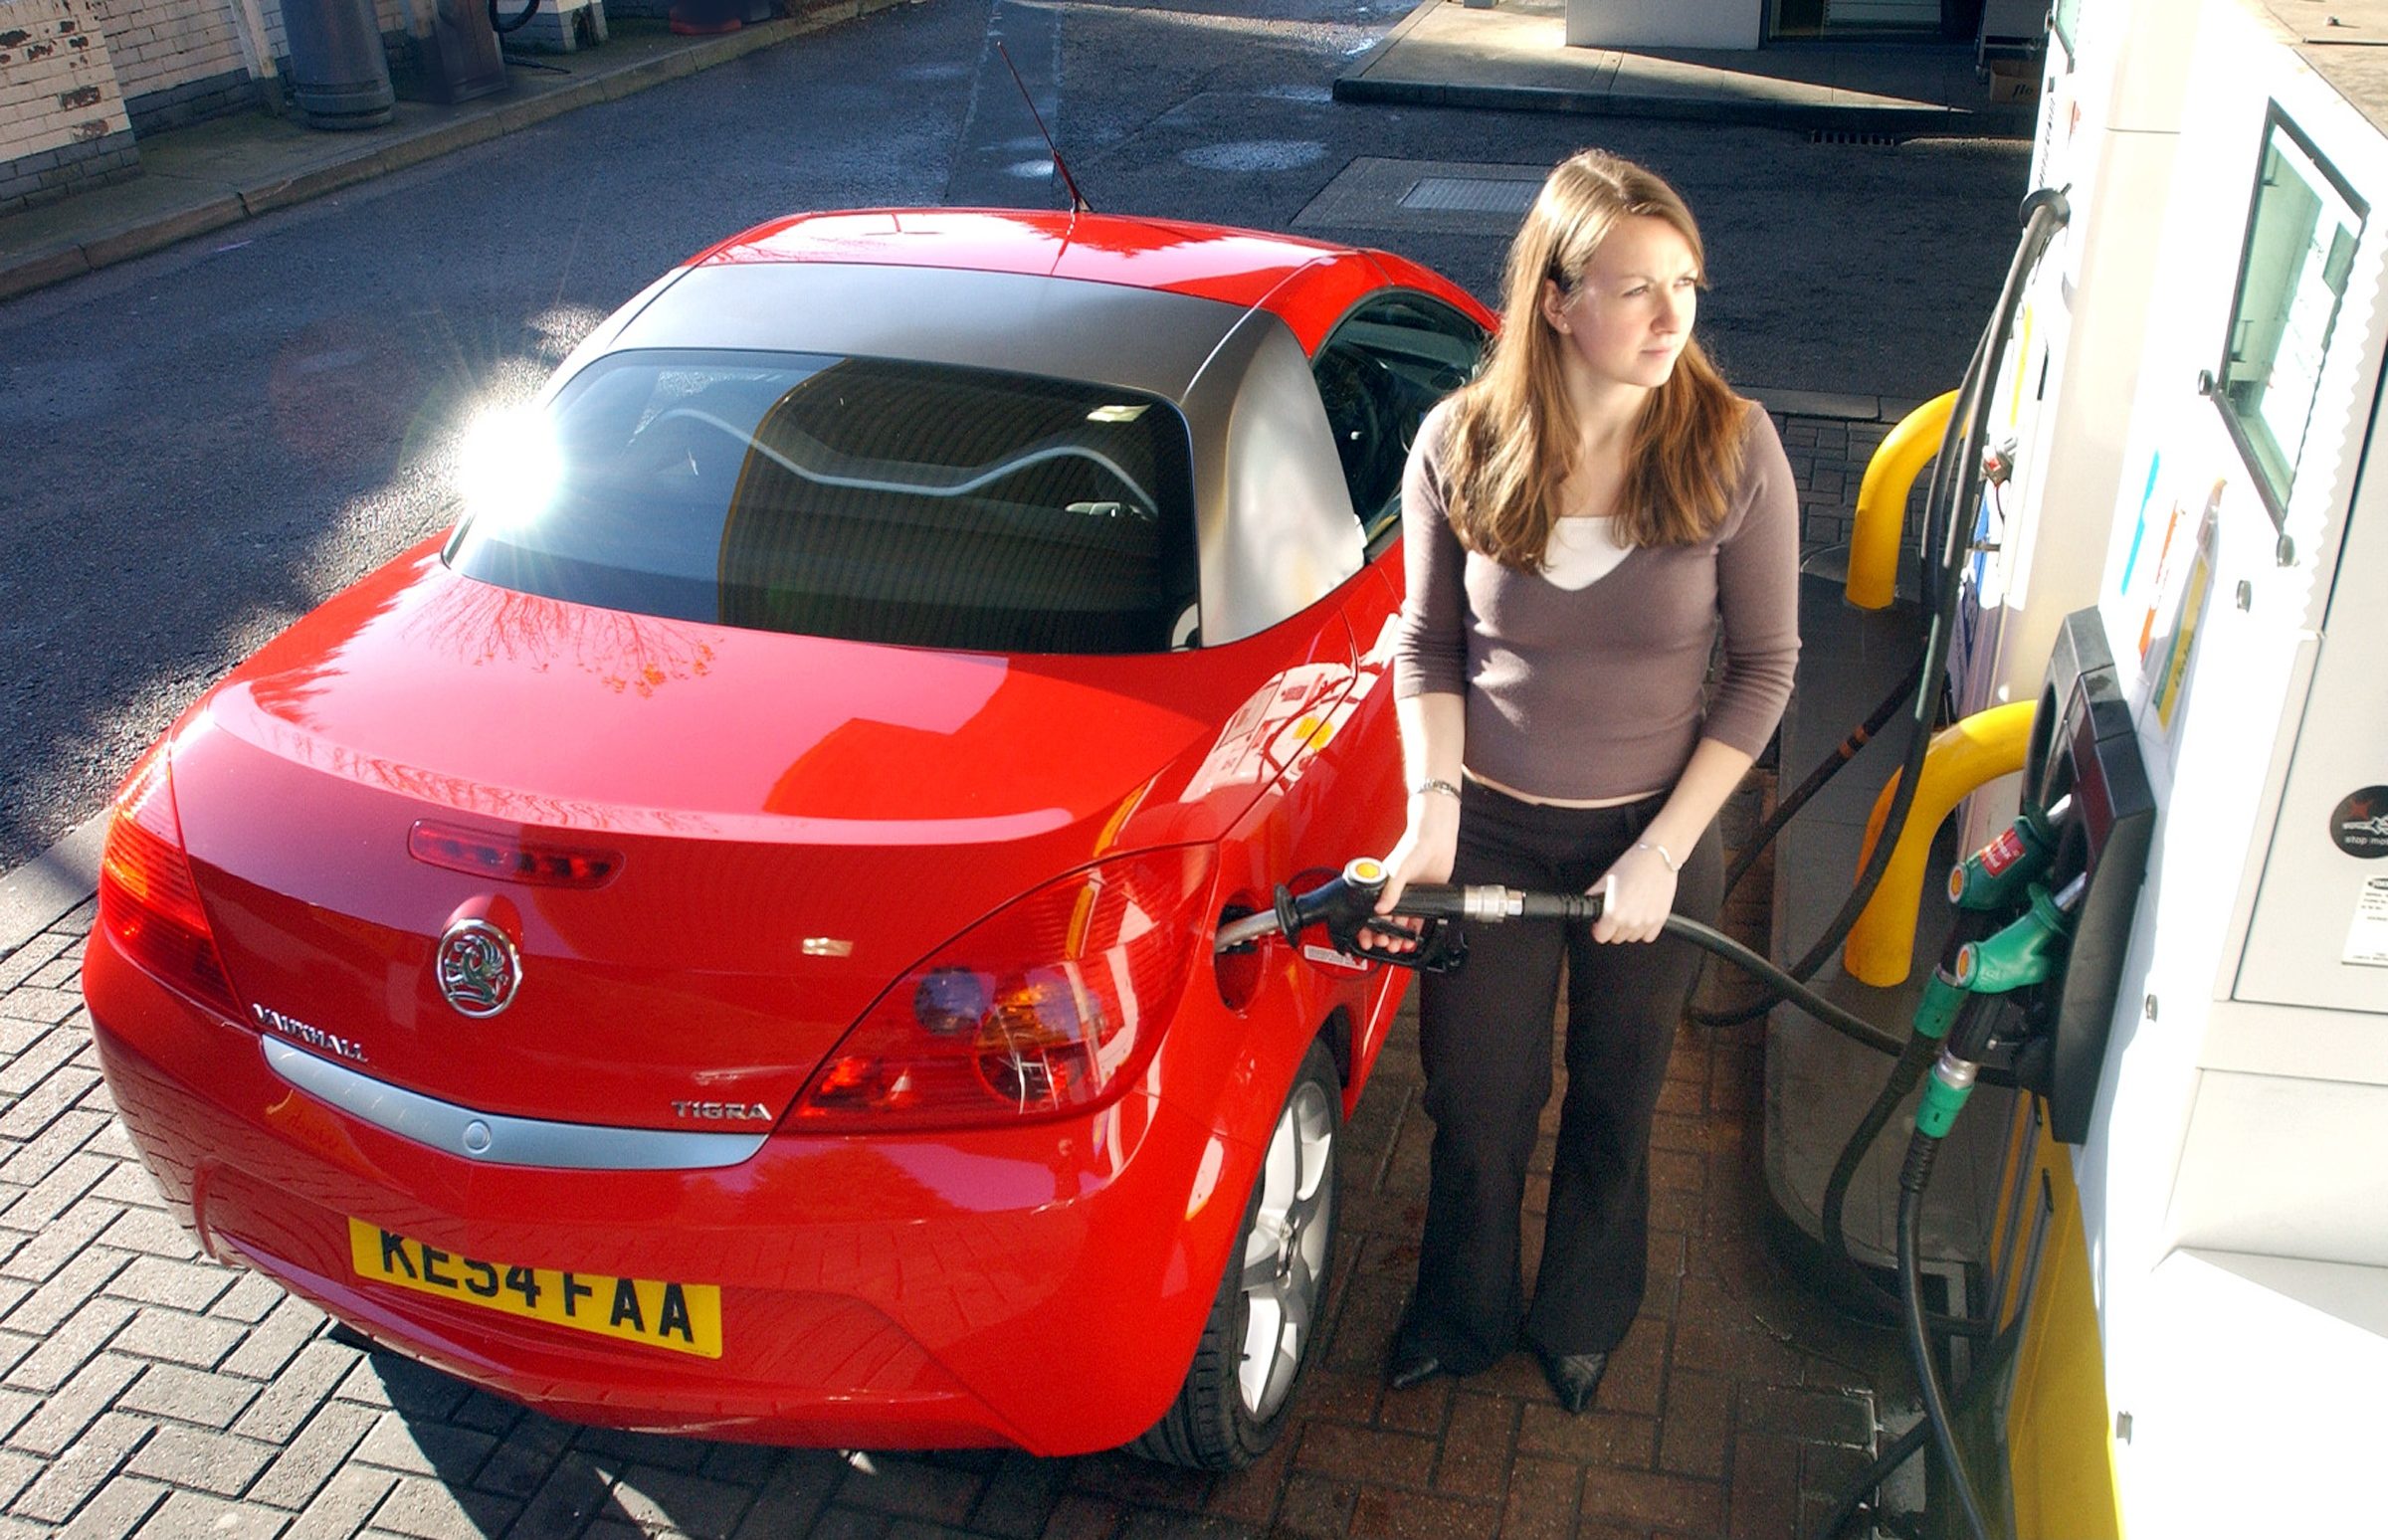 Filled your car with the wrong fuel? Here's what to do